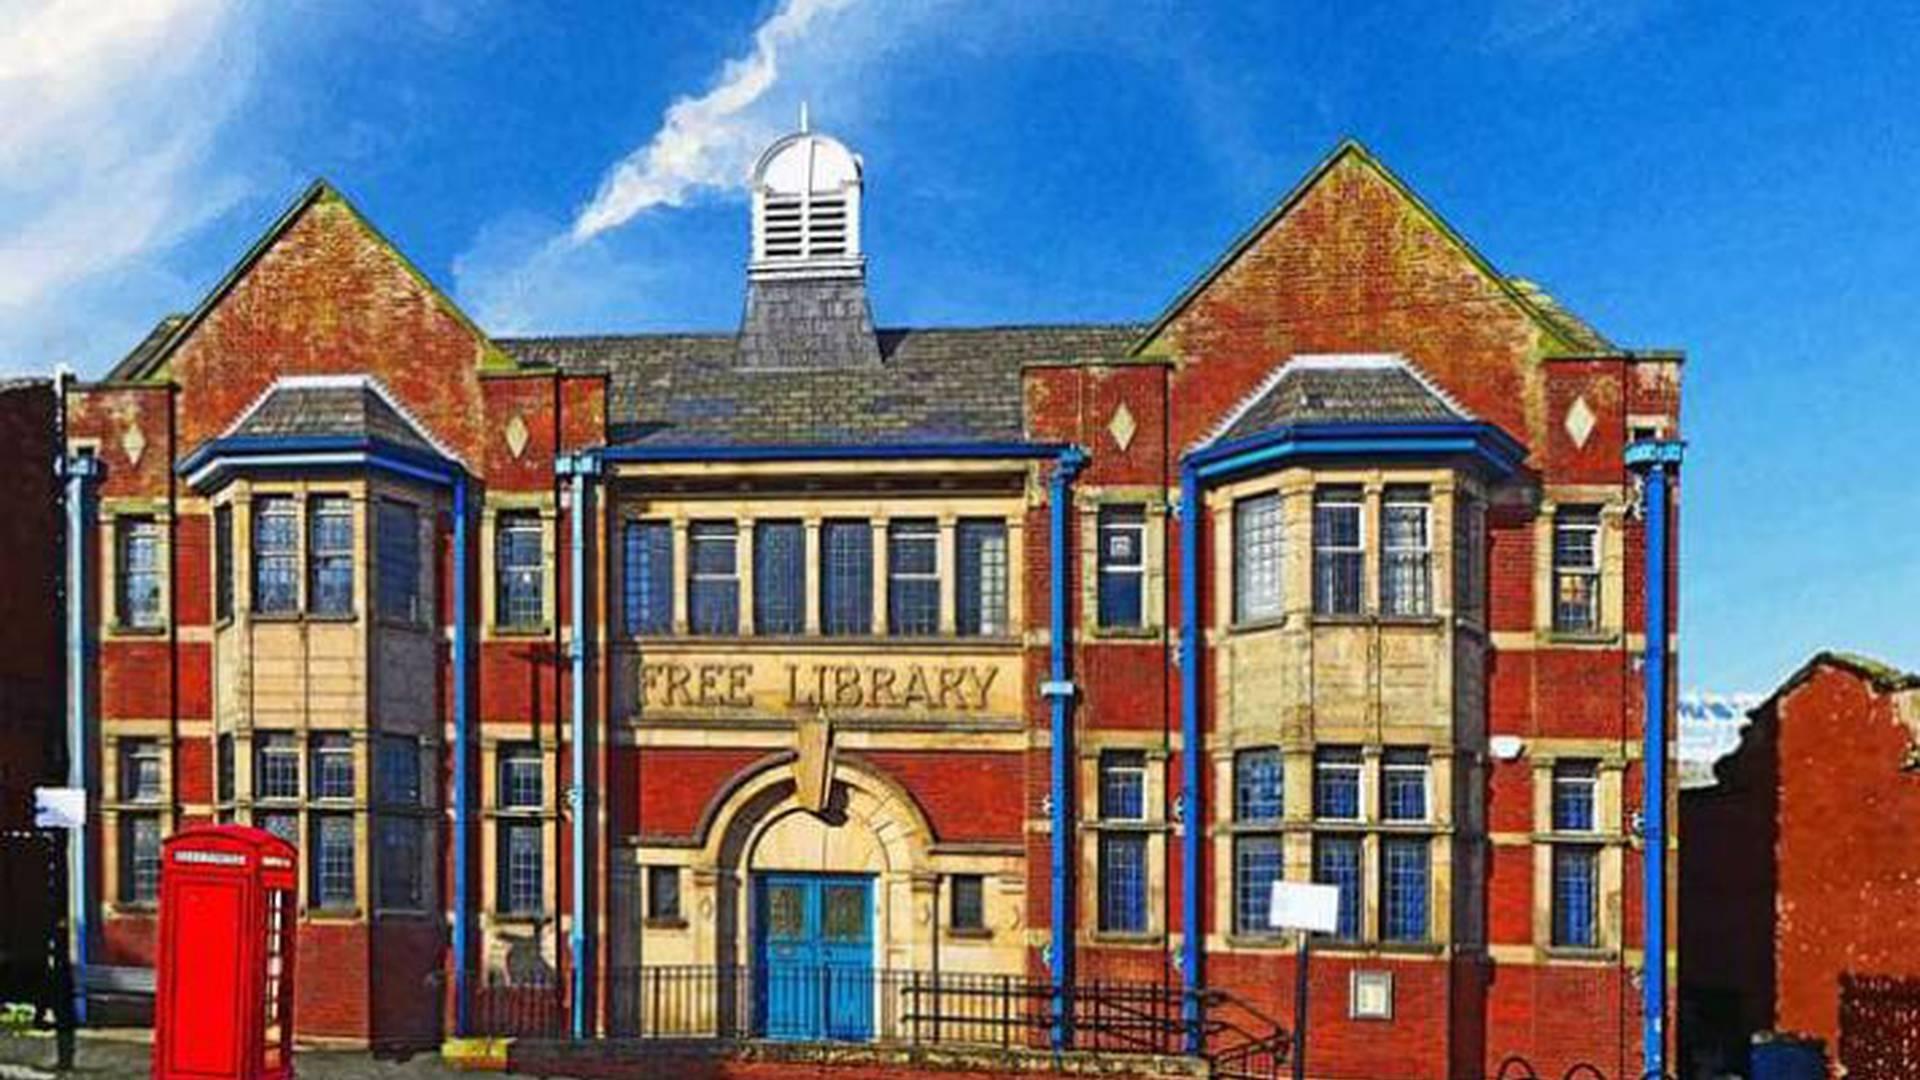 Friends of Stirchley Library photo